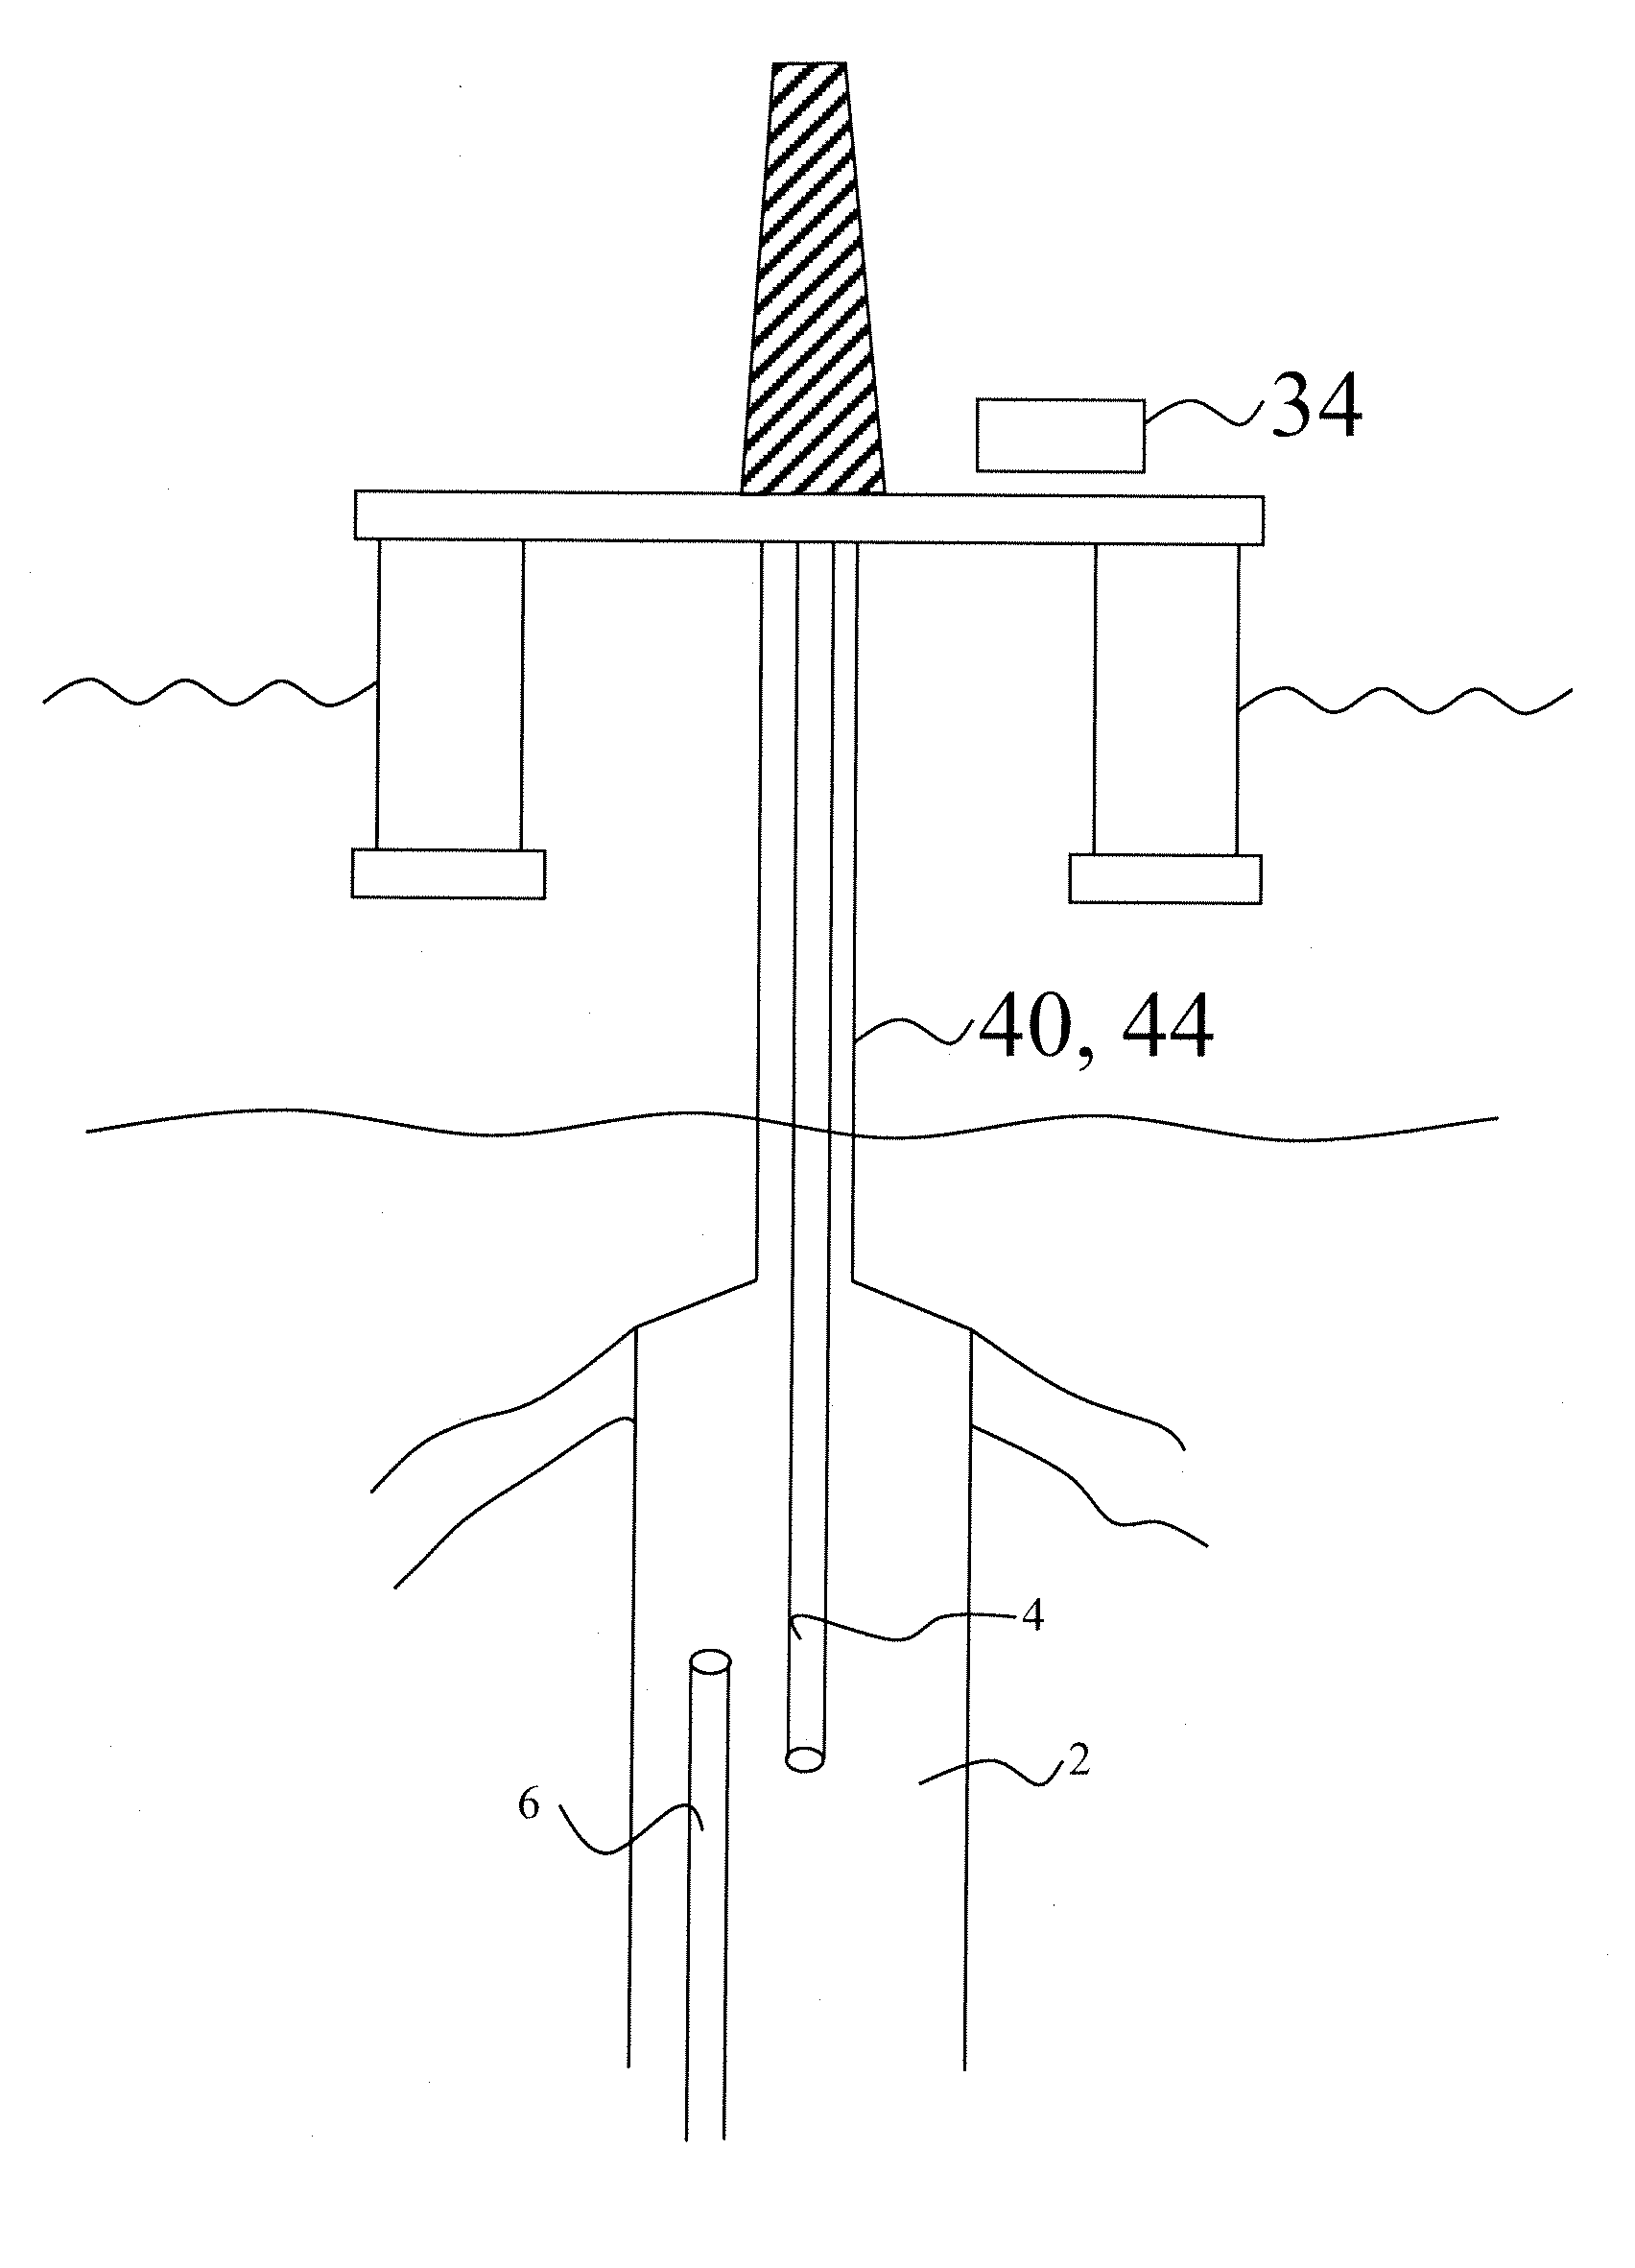 Pipeline instrumentation and control system